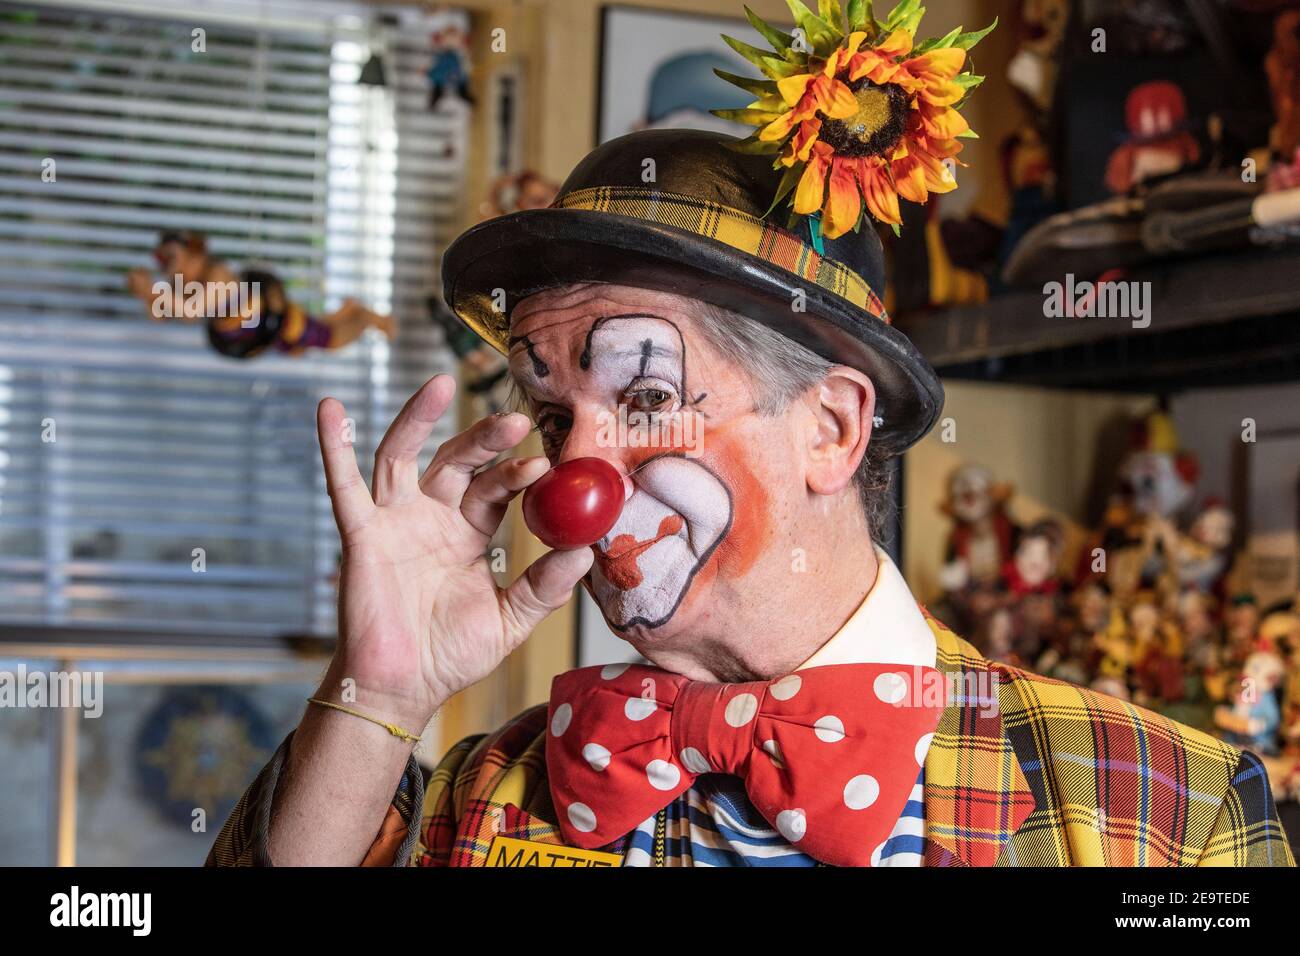 PHOTO:JEFF GILBERT 05th February 2021. Clerkenwell, London, UK Mattie chief clown and organiser of Clowns international preparing to celebrate the 75th anniversary of Grimaldi Clown service on Sunday 7th February 2021, at his home in Clerkenwell in the area where Joseph Grimaldi also lived from 1818 to 1829. The annual church service cannot take place this year due to COVID restrictions . But Mattie will has prepared a virtual church service showing historical clips to celebrate the occasion. Credit: Jeff Gilbert/Alamy Live News Stock Photo